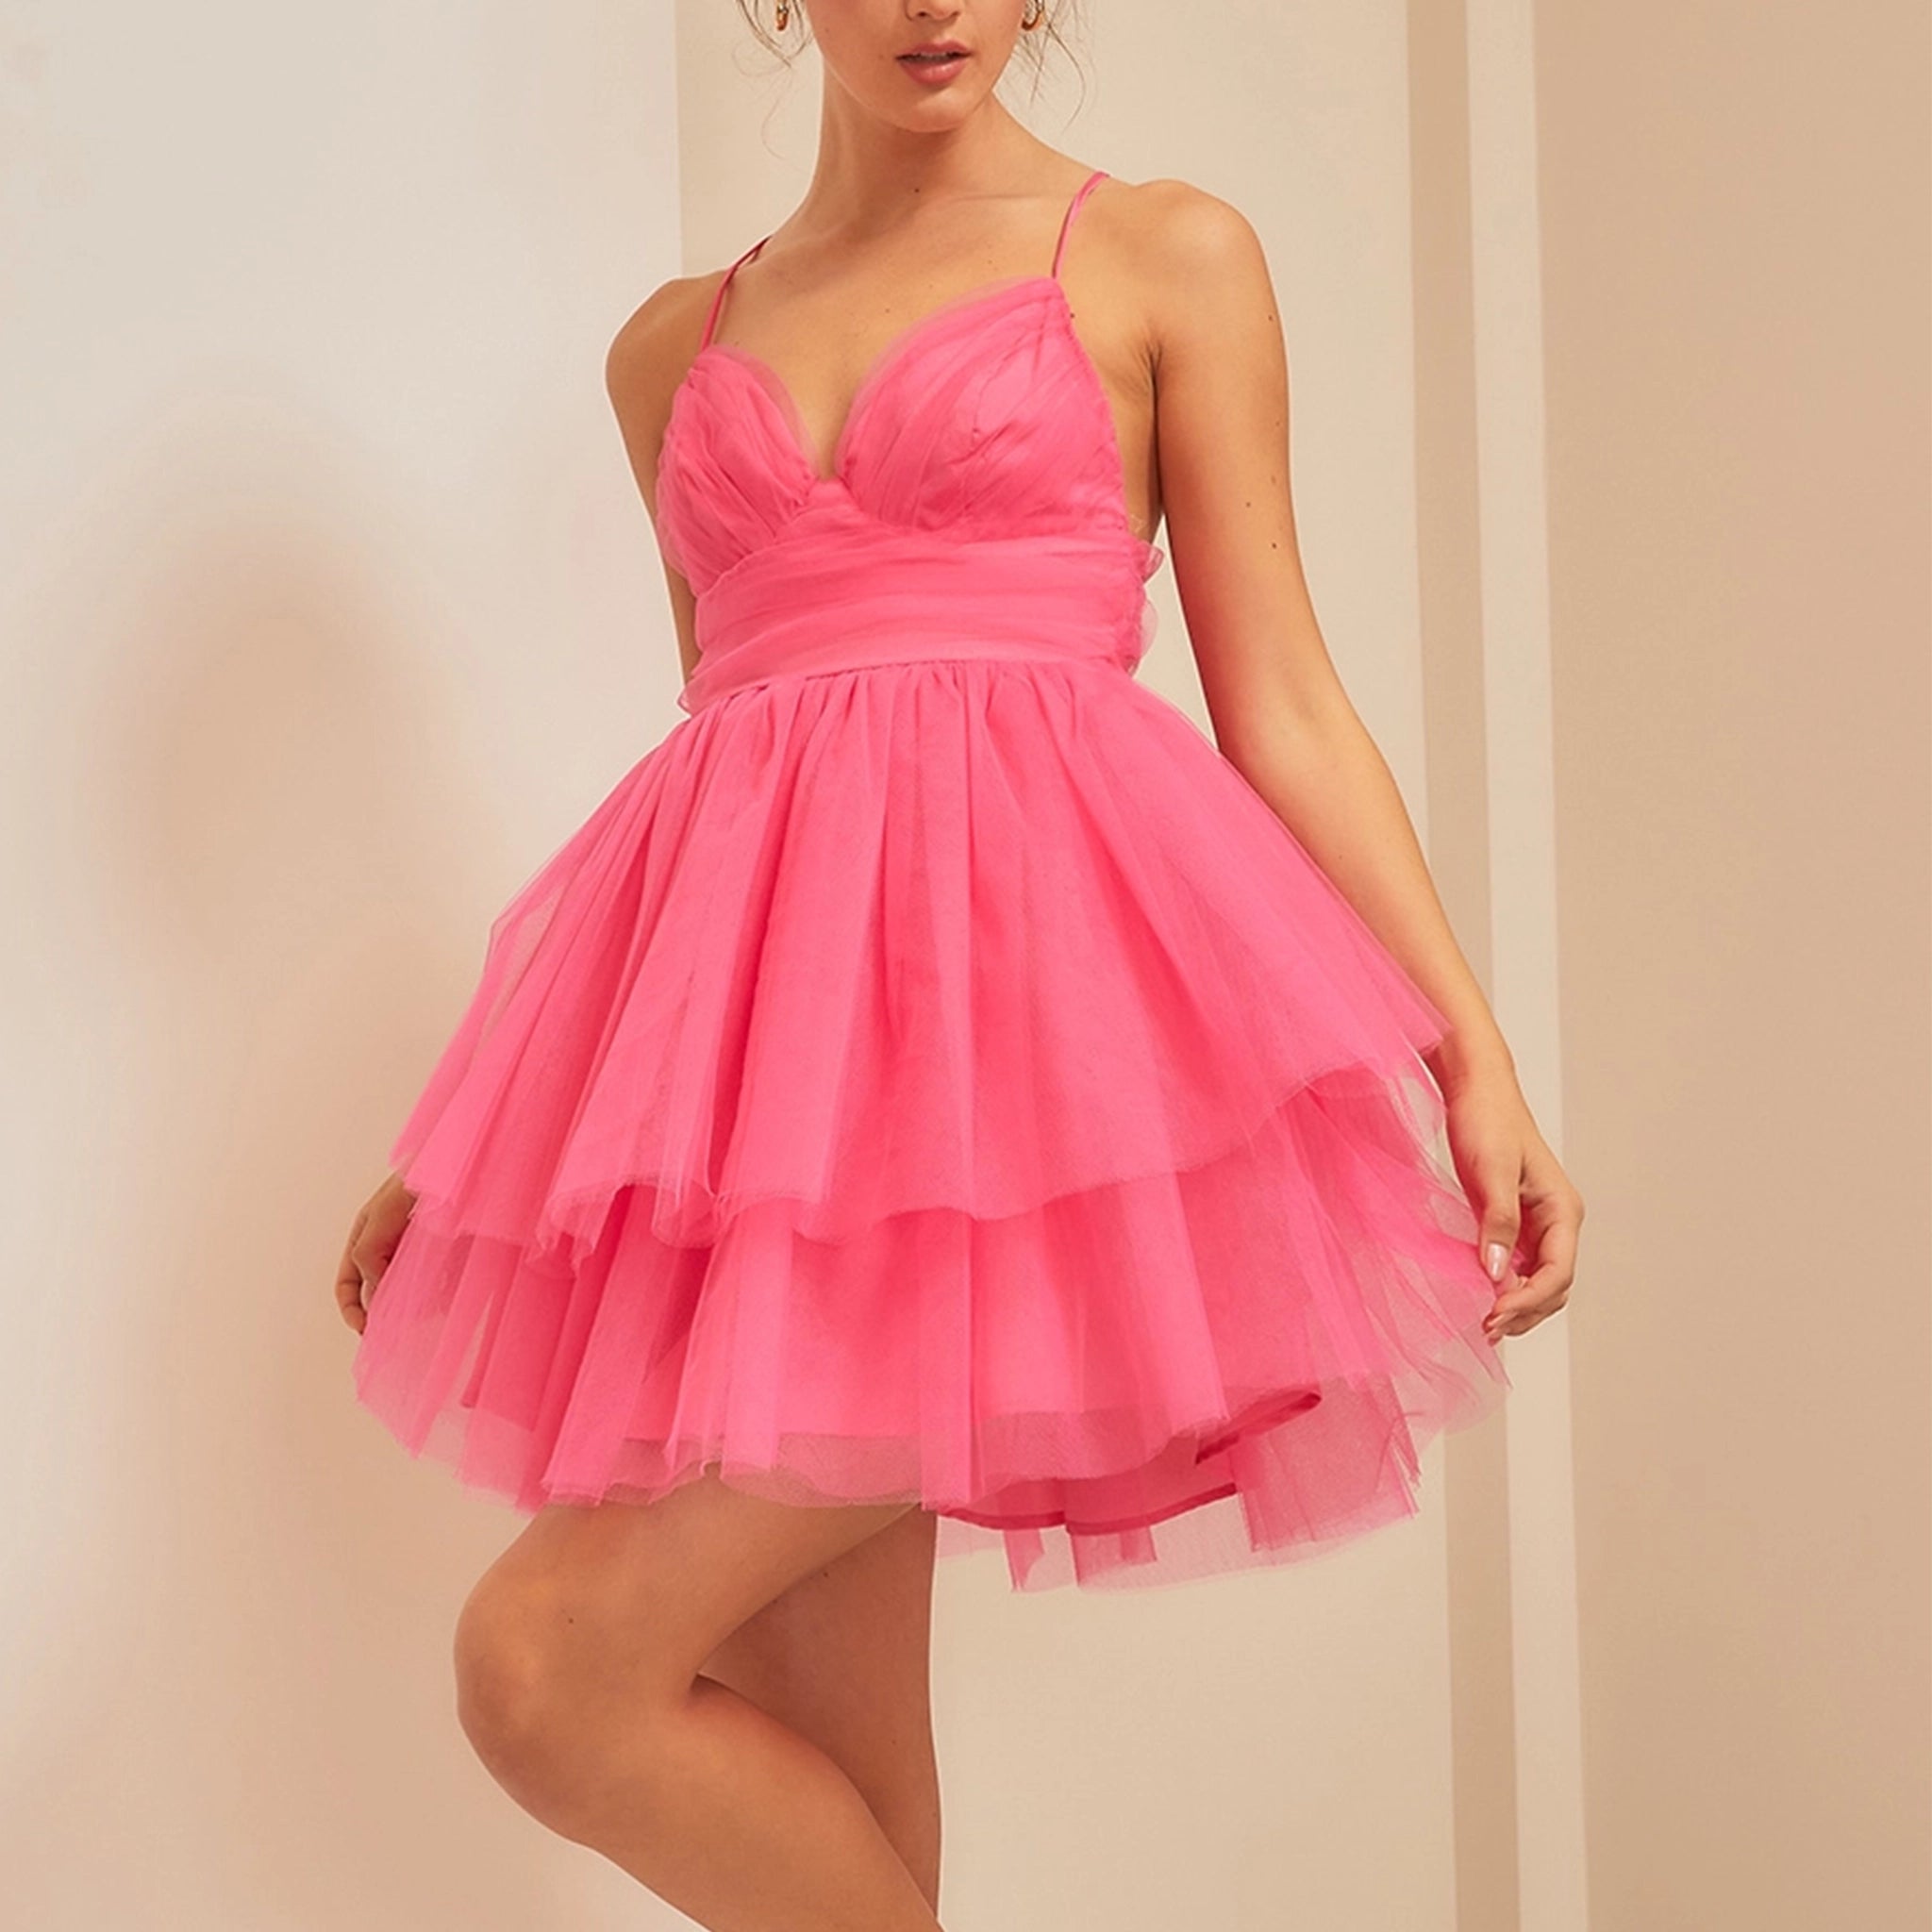 On a neutral background is a model wearing a hot pink tulle mini dress with a sweetheart neckline and thin straps. 